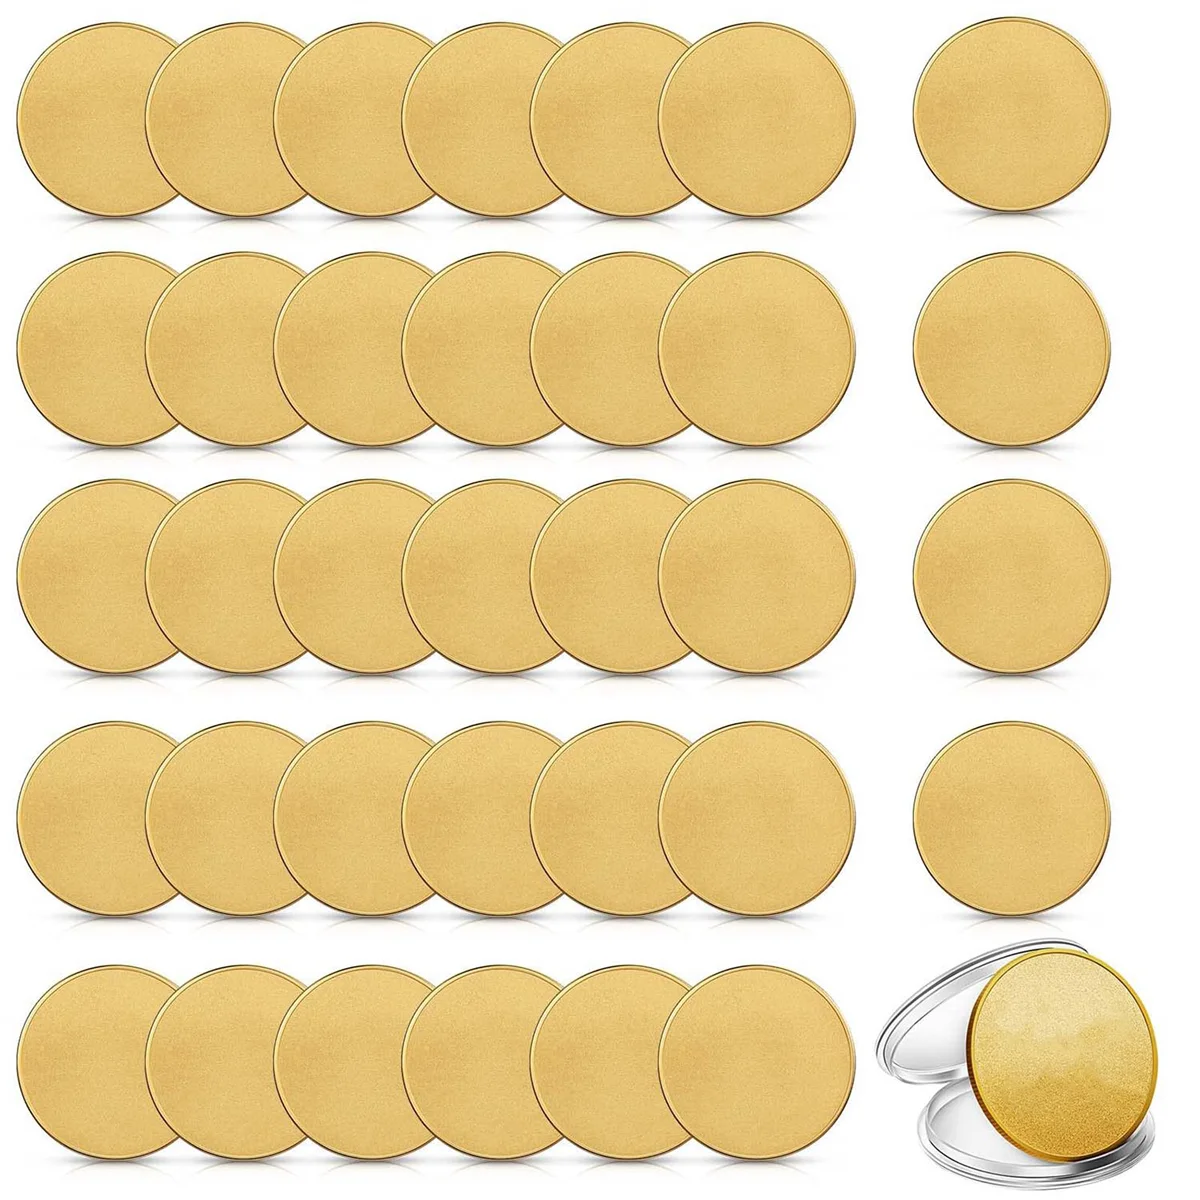 

30 Pcs Blank Challenge Coins for Engraving Blanks Coin Threaded Edged 40 mm with Acrylic Protection Box